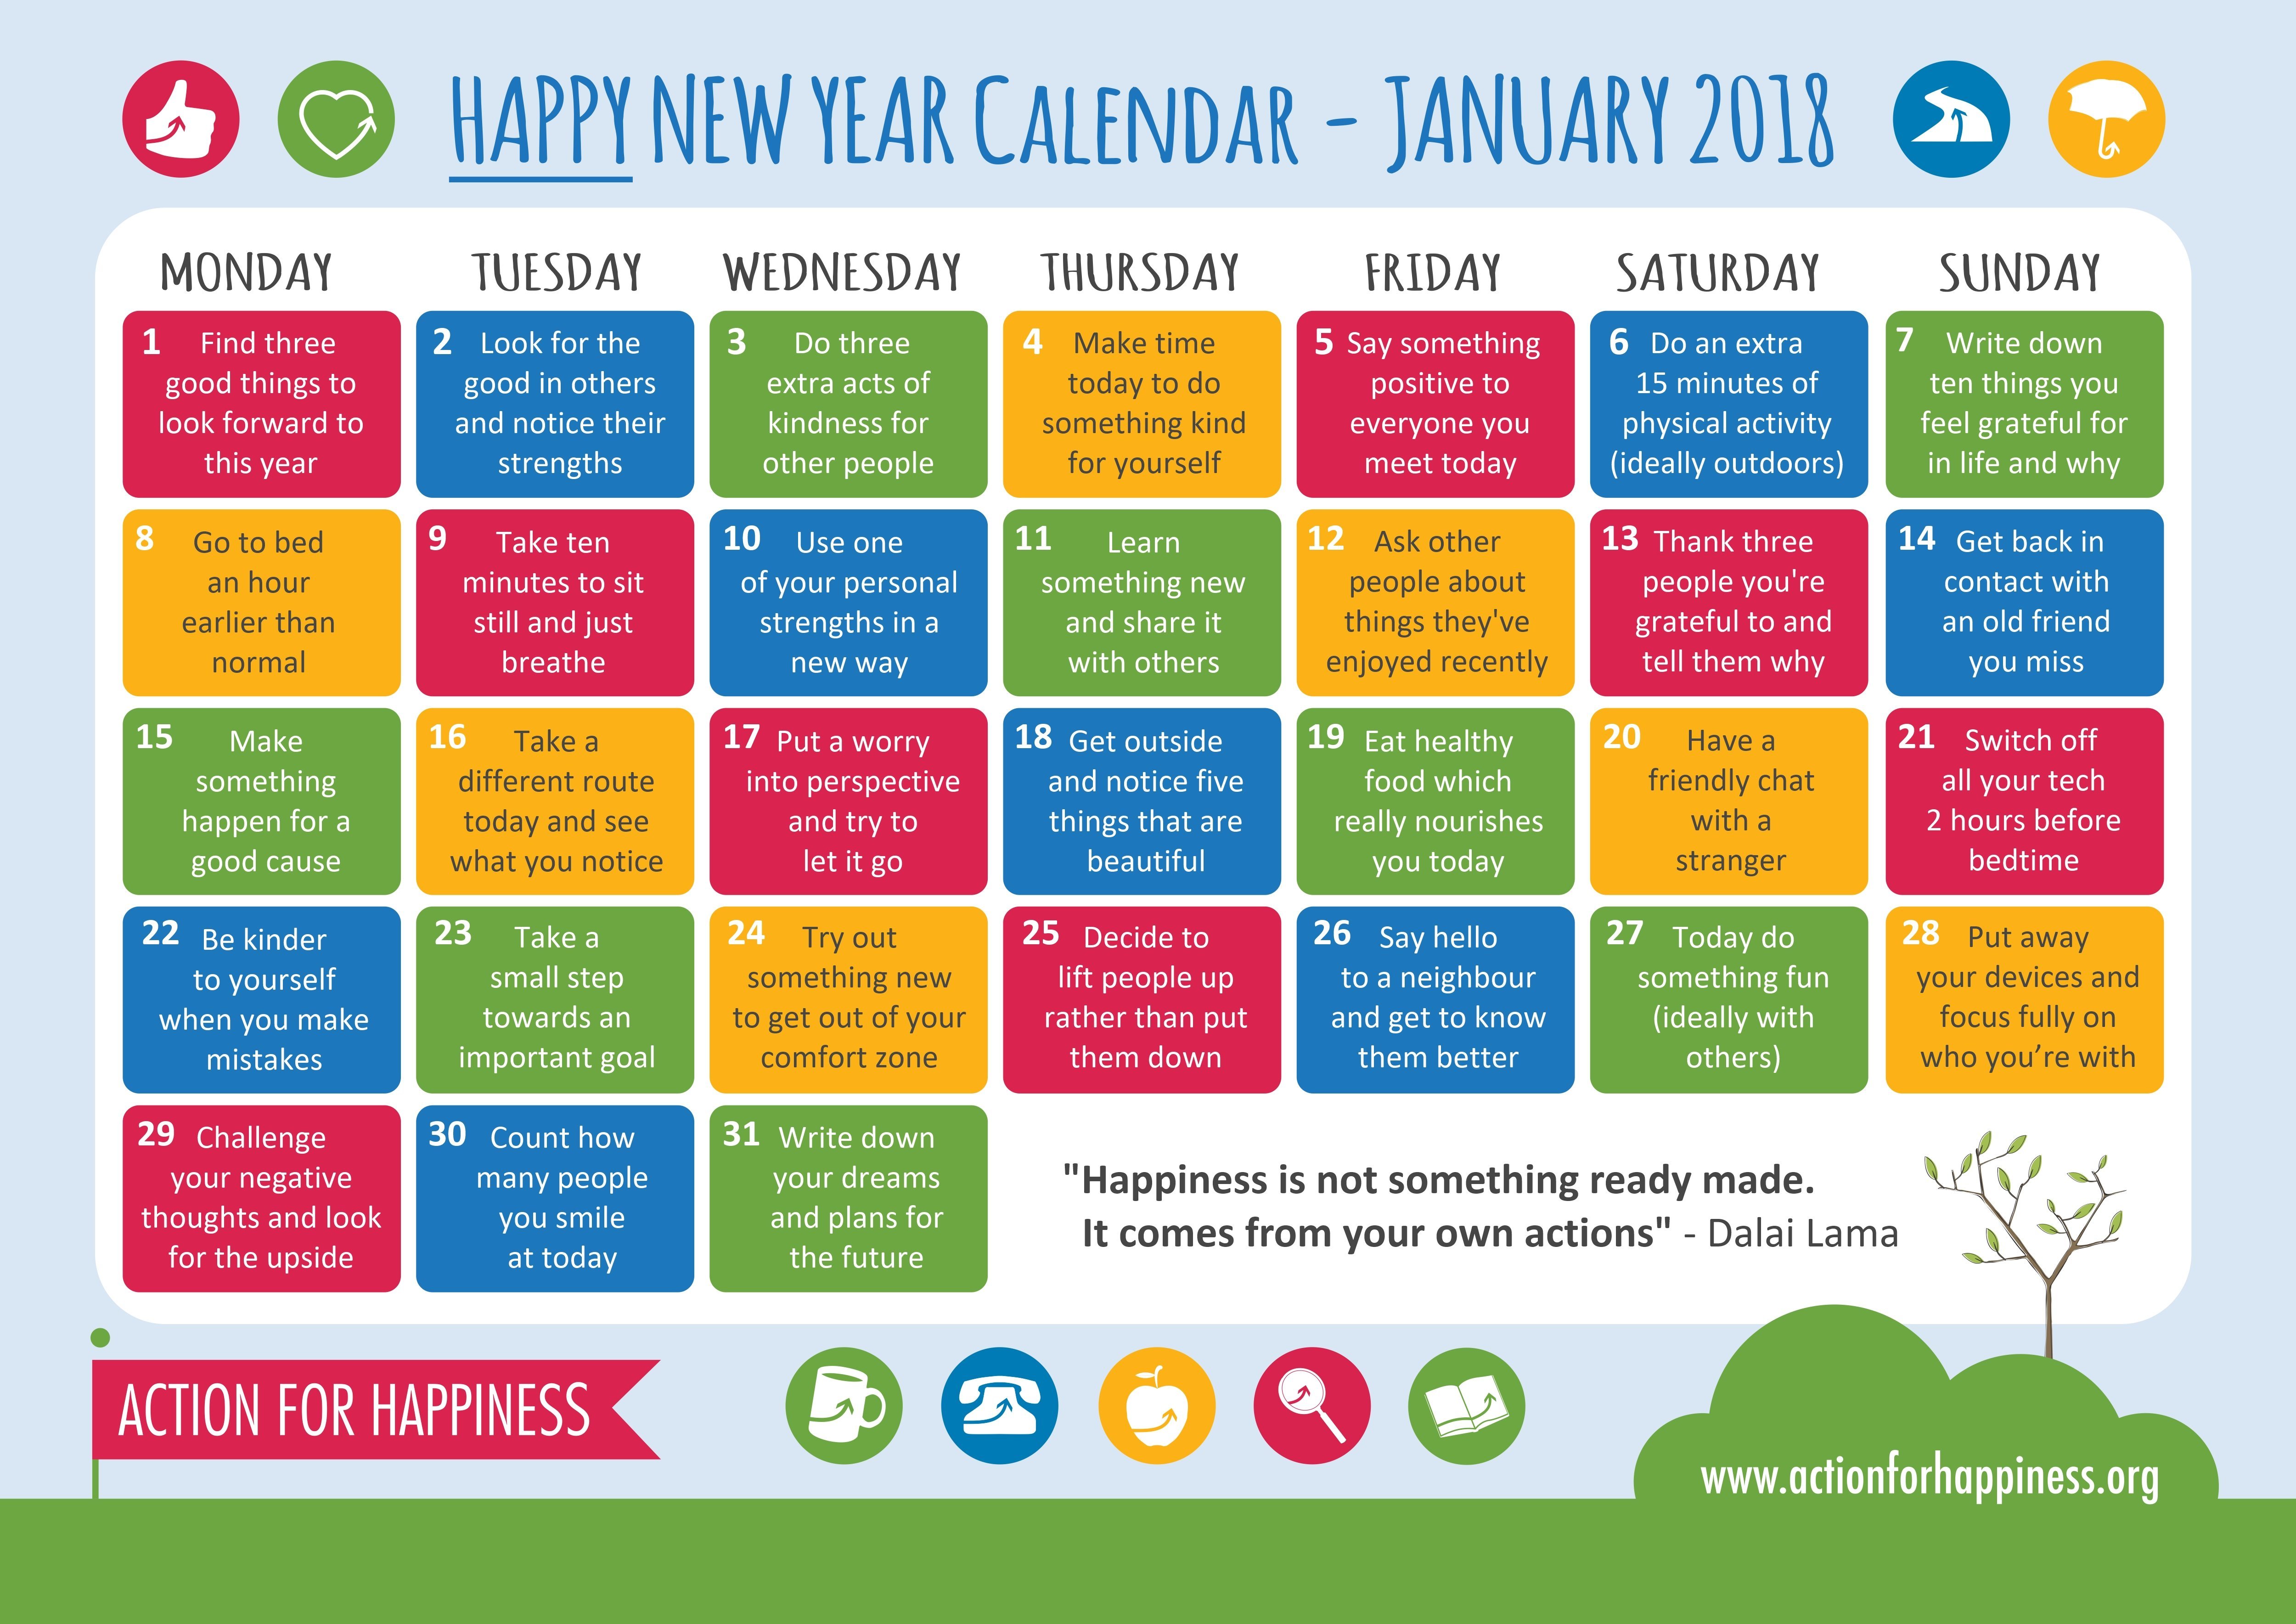 <a href="http://www.actionforhappiness.org/happy-new-year"  data-credit=